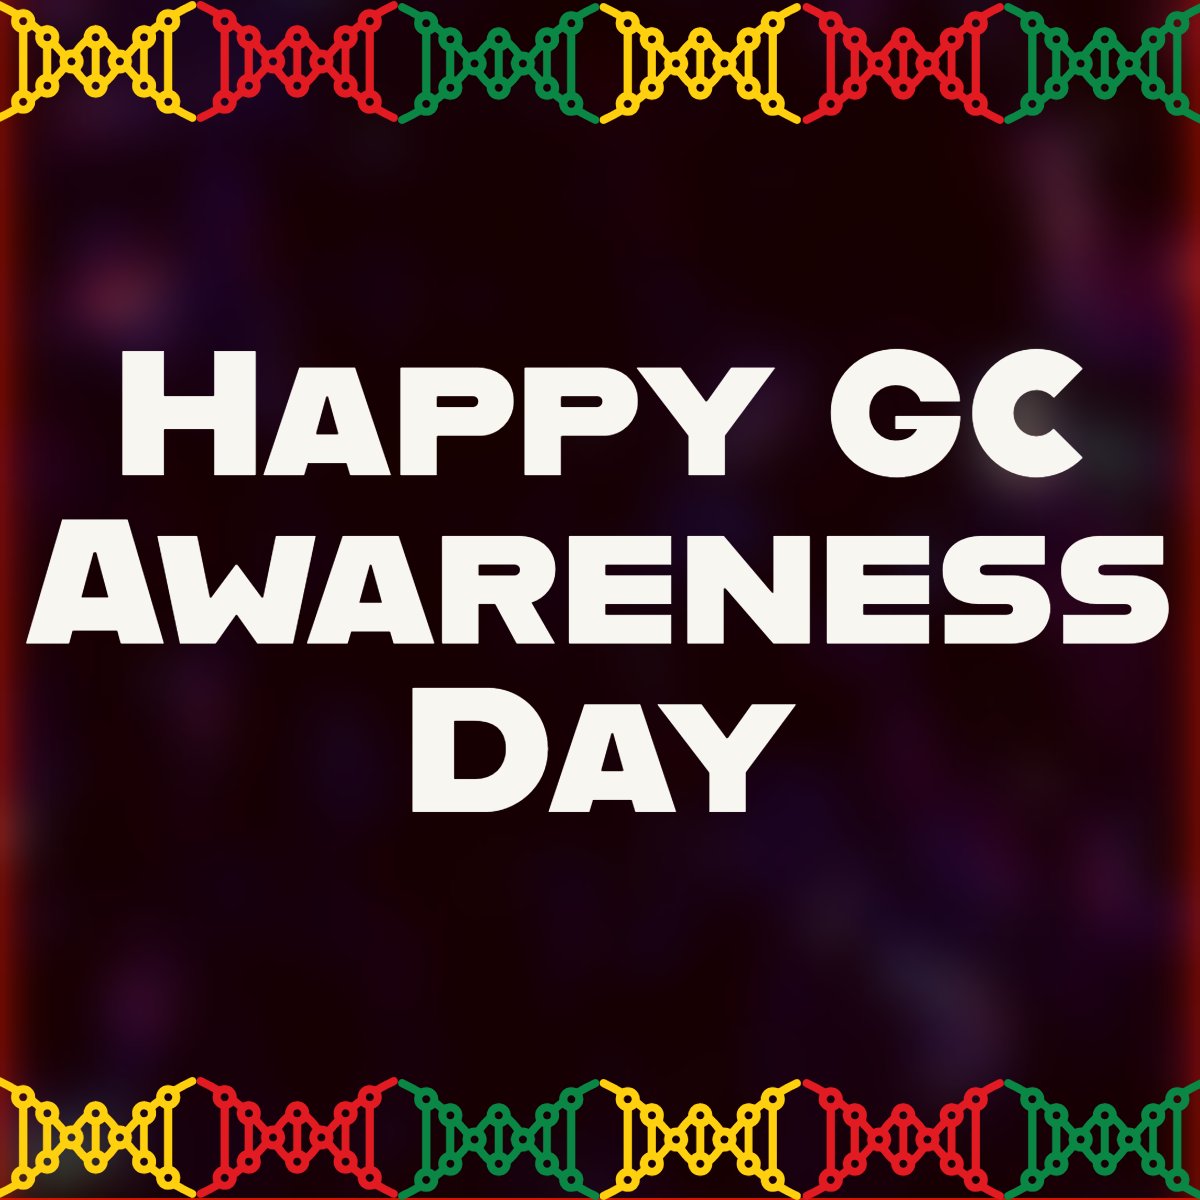 Happy GC Awareness Day! Today we will be sharing info about who we are and what we do! #iamageneticcounselor #geneticcounselor